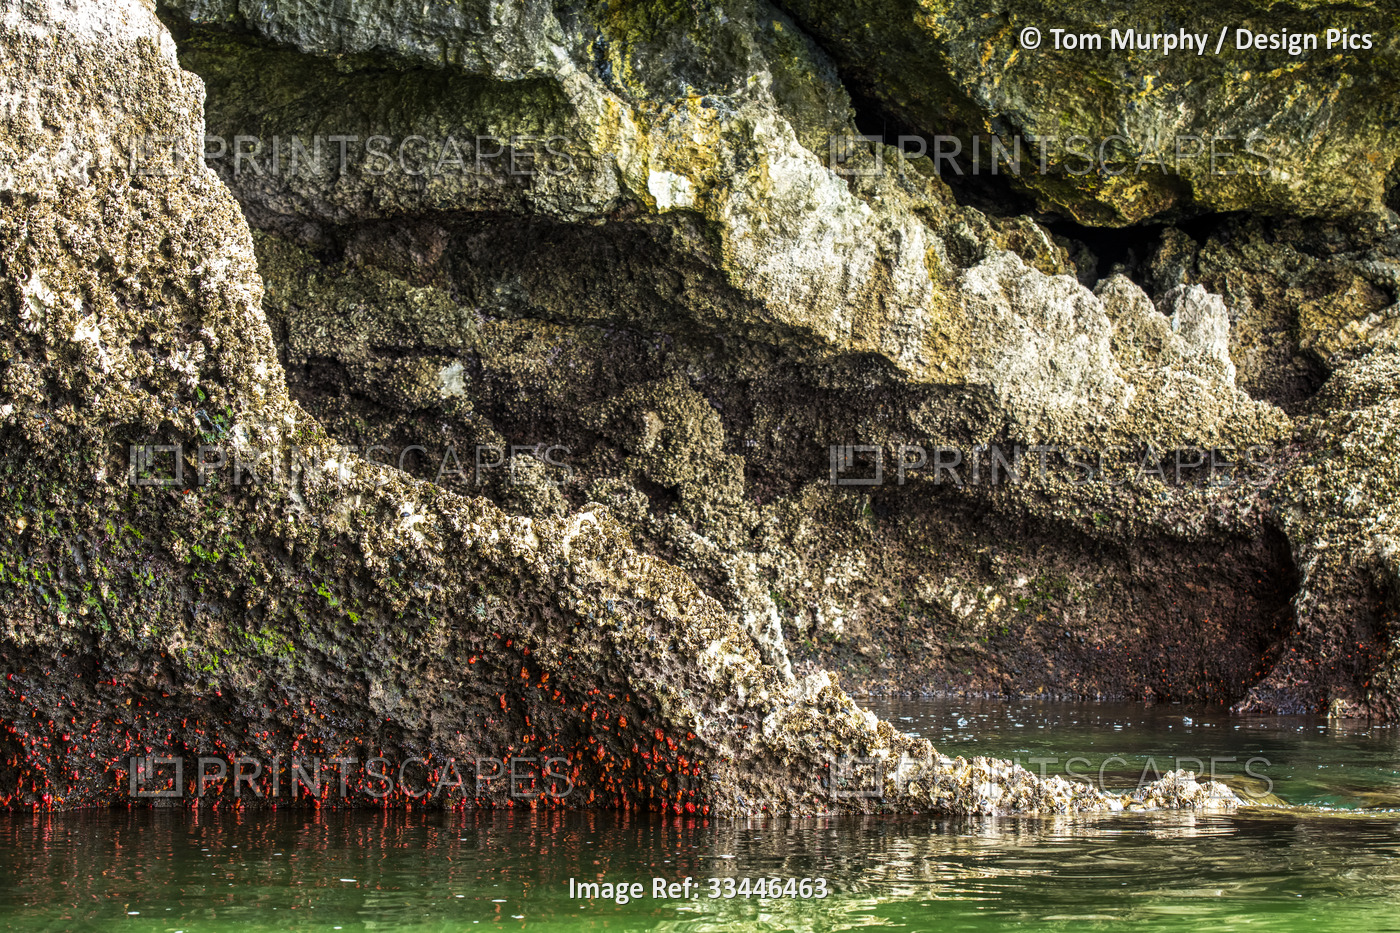 Close-up of the aquatic growth and crusty surface of the eroded limestone rock ...